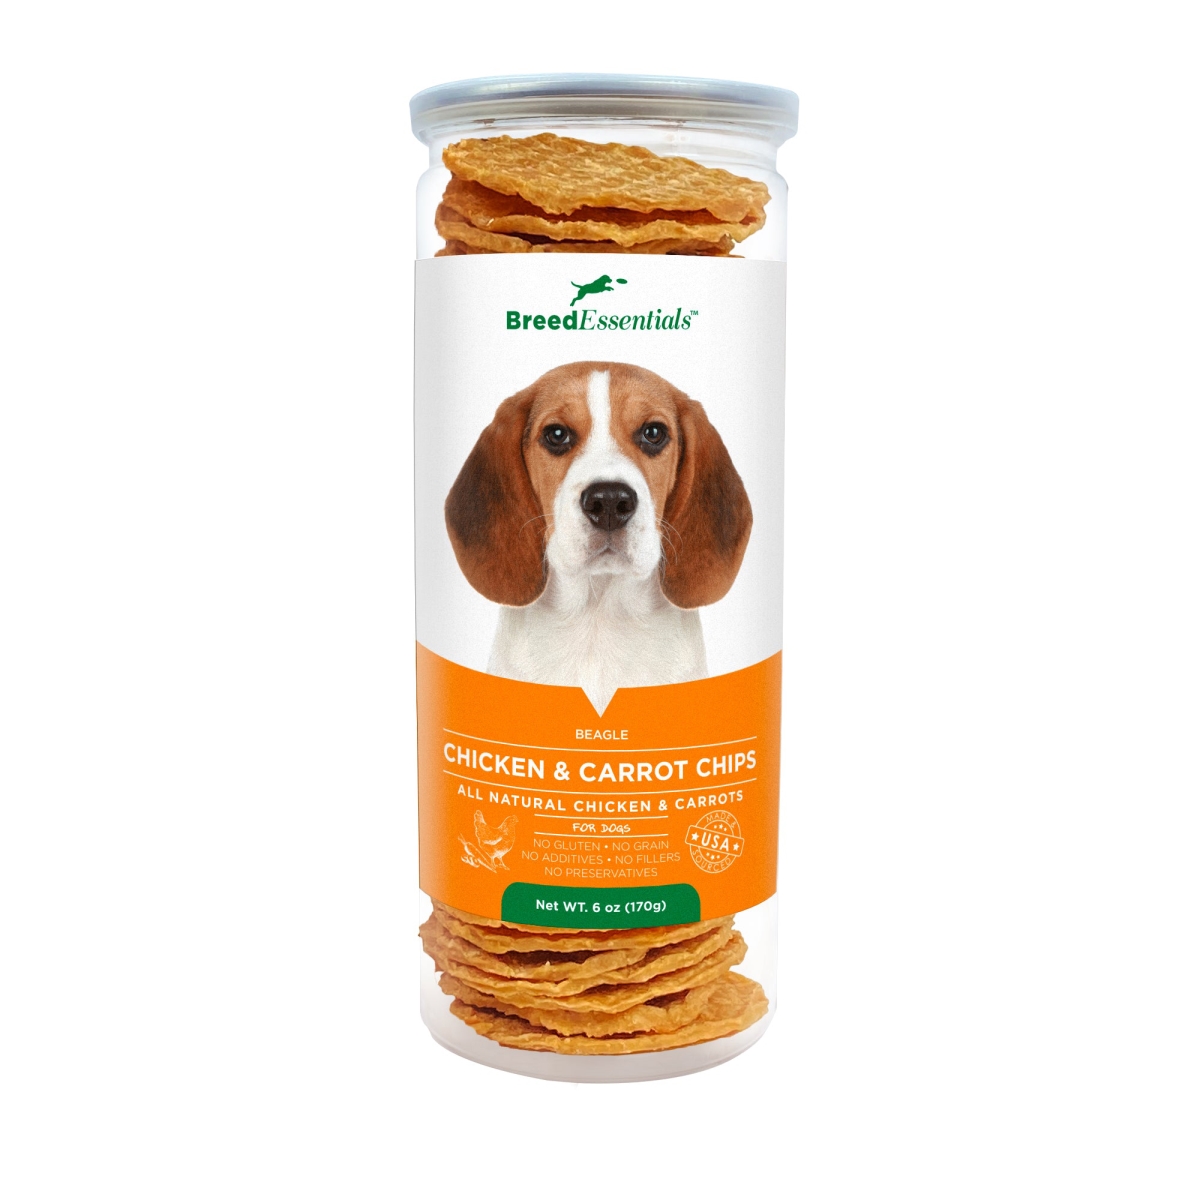 Picture of Breed Essentials 197247000136 6 oz Chicken & Carrot Chips - Beagle